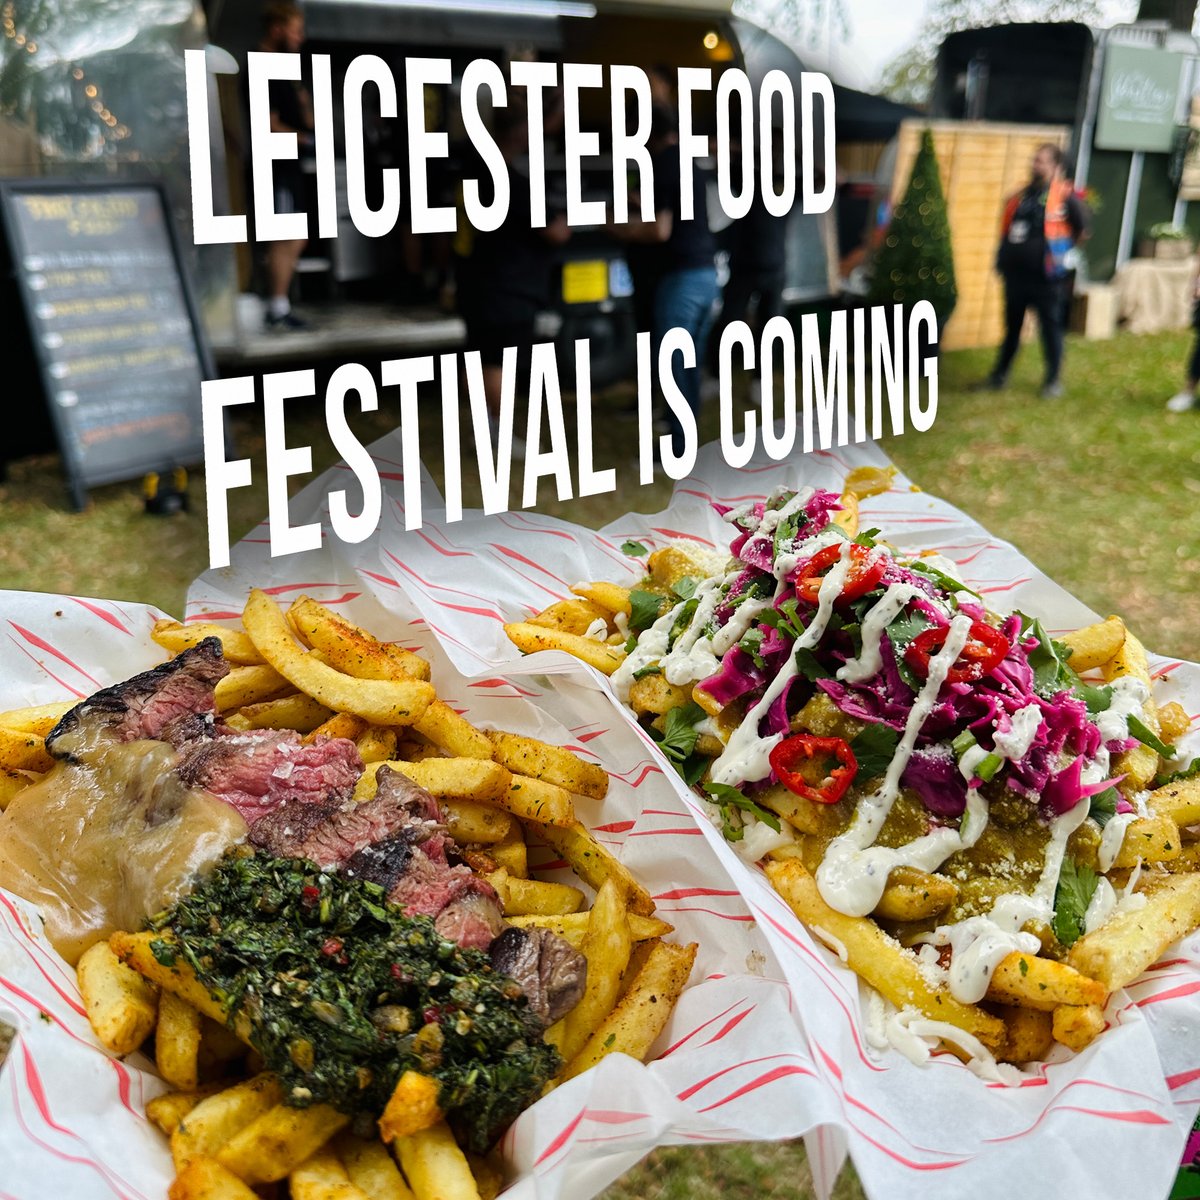 We've got all the info on Leicester Food Festival in our new blog, from early bird tickets to timings, performances and activities and loads more. Click here for all the info ow.ly/u16a50ROCrk #leicester #food #tastetheplace